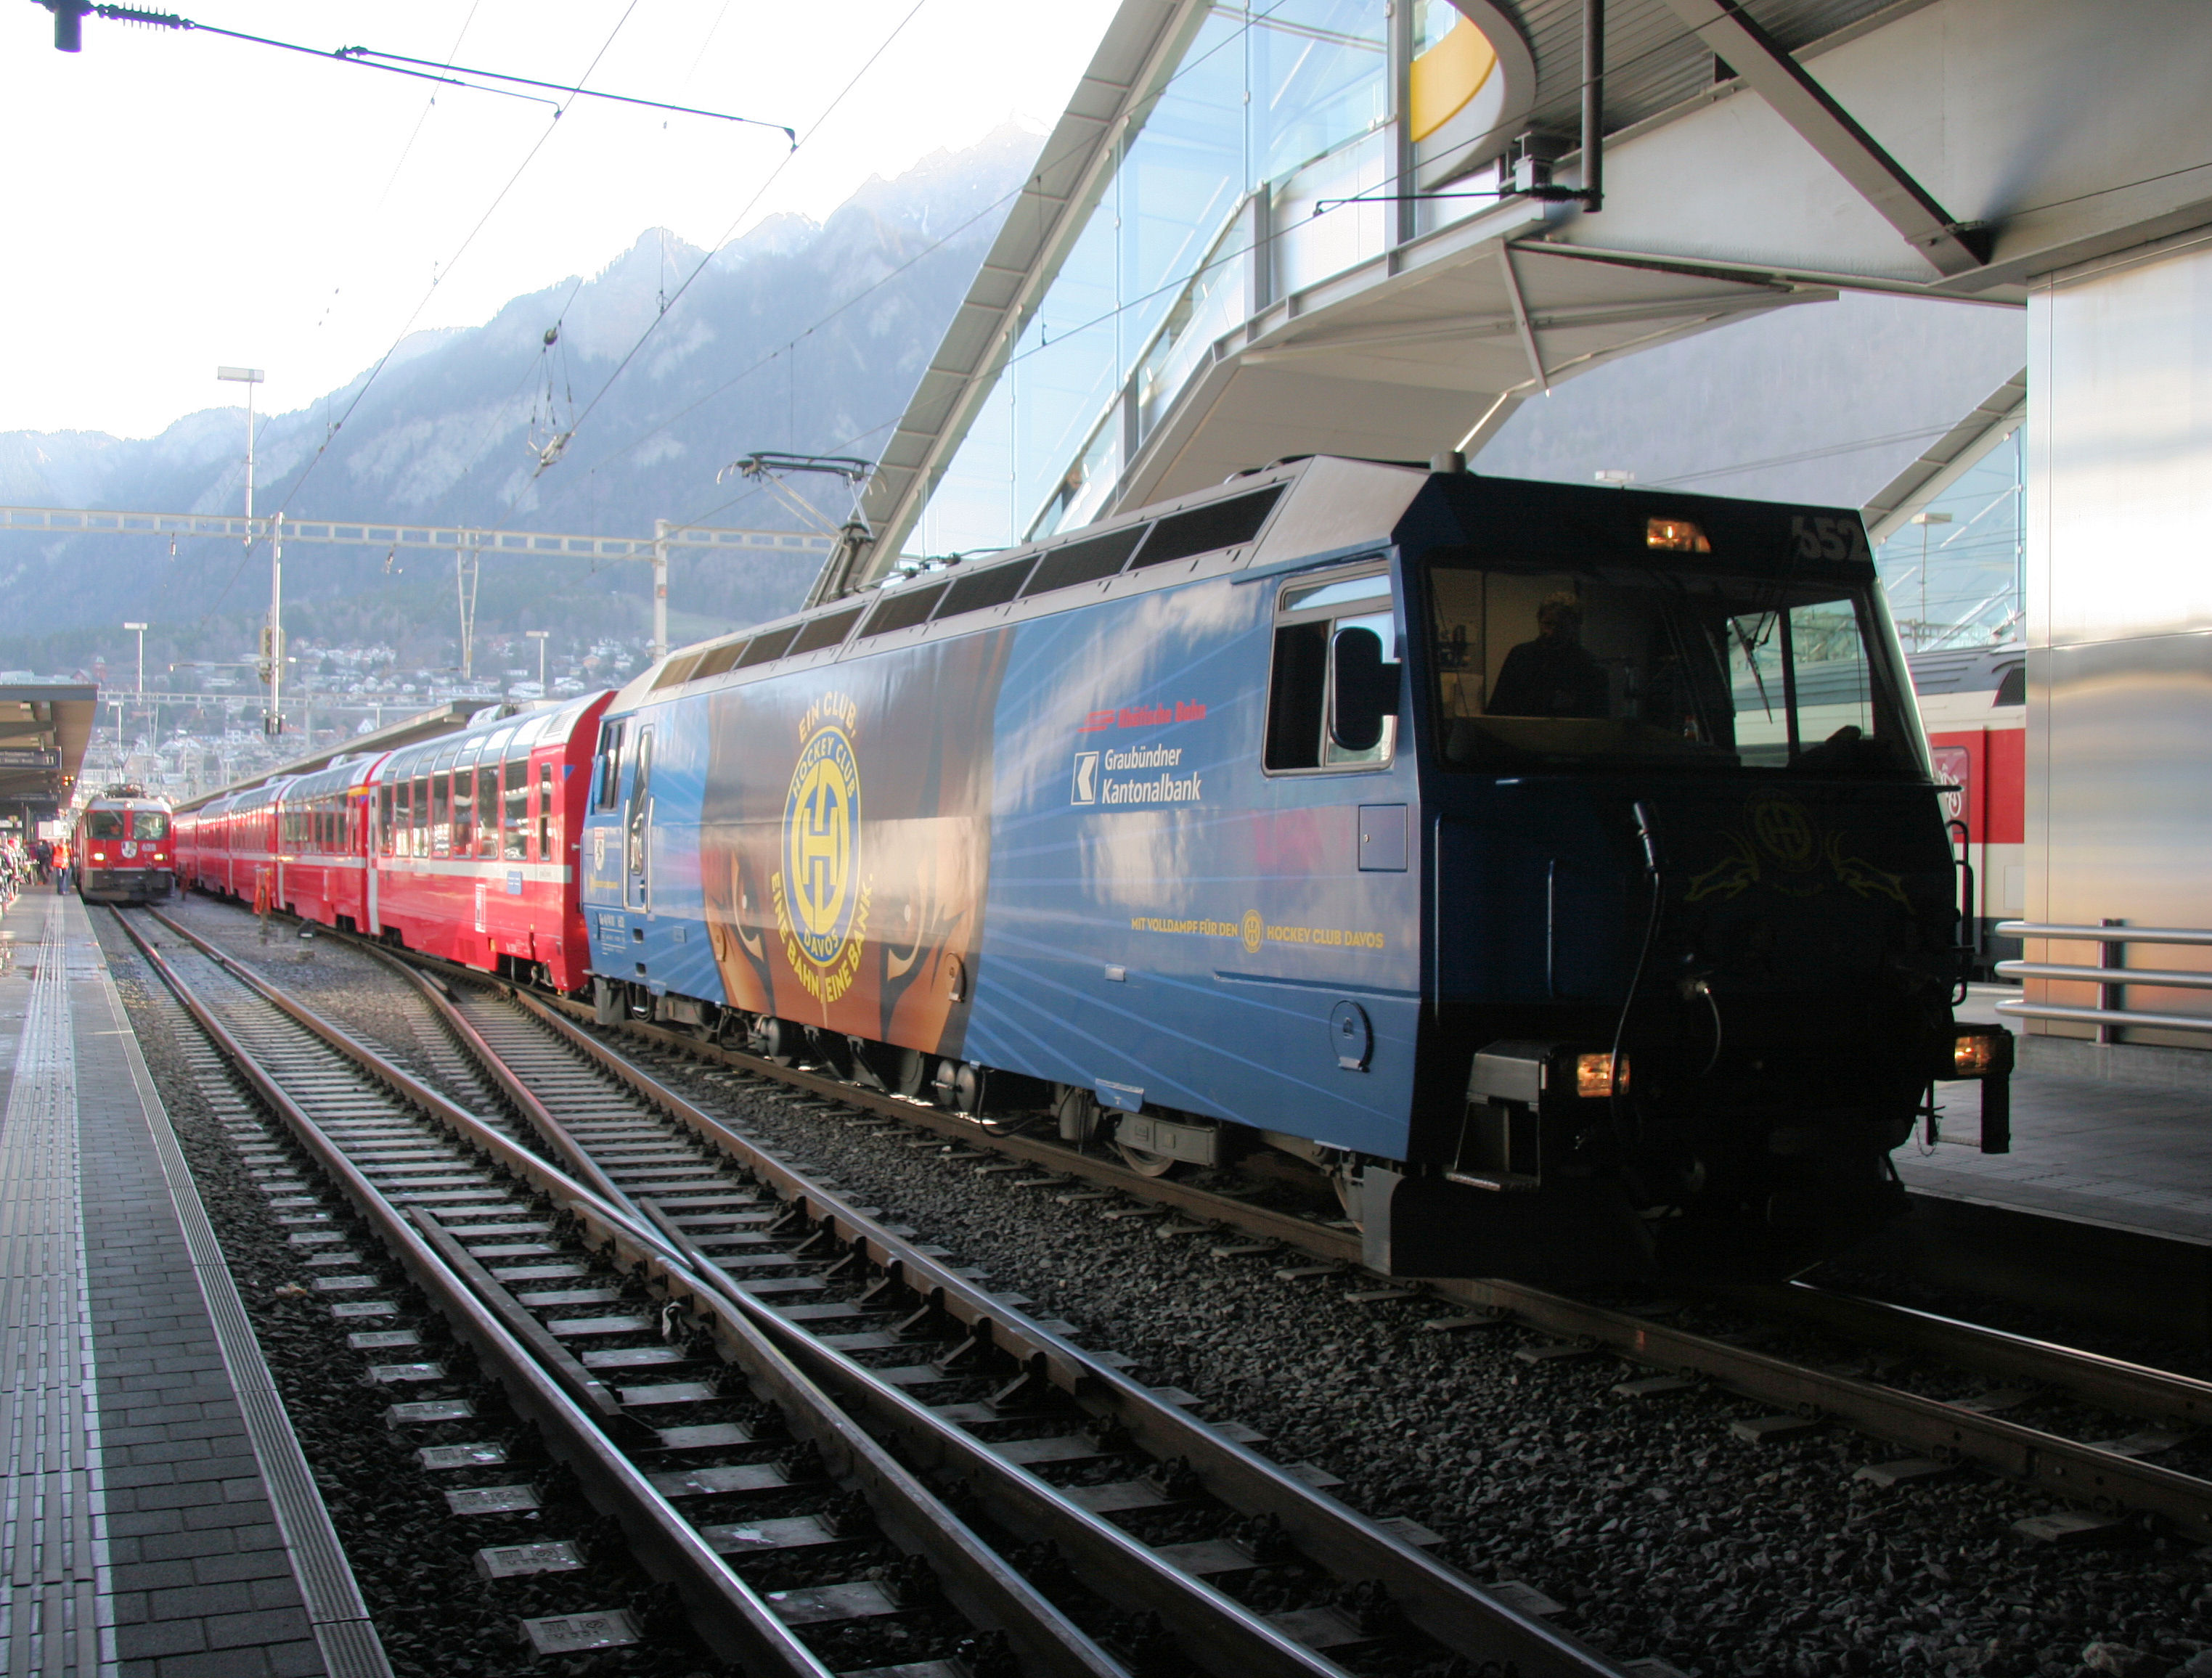 So we bought ourselves a Swiss Railpass...